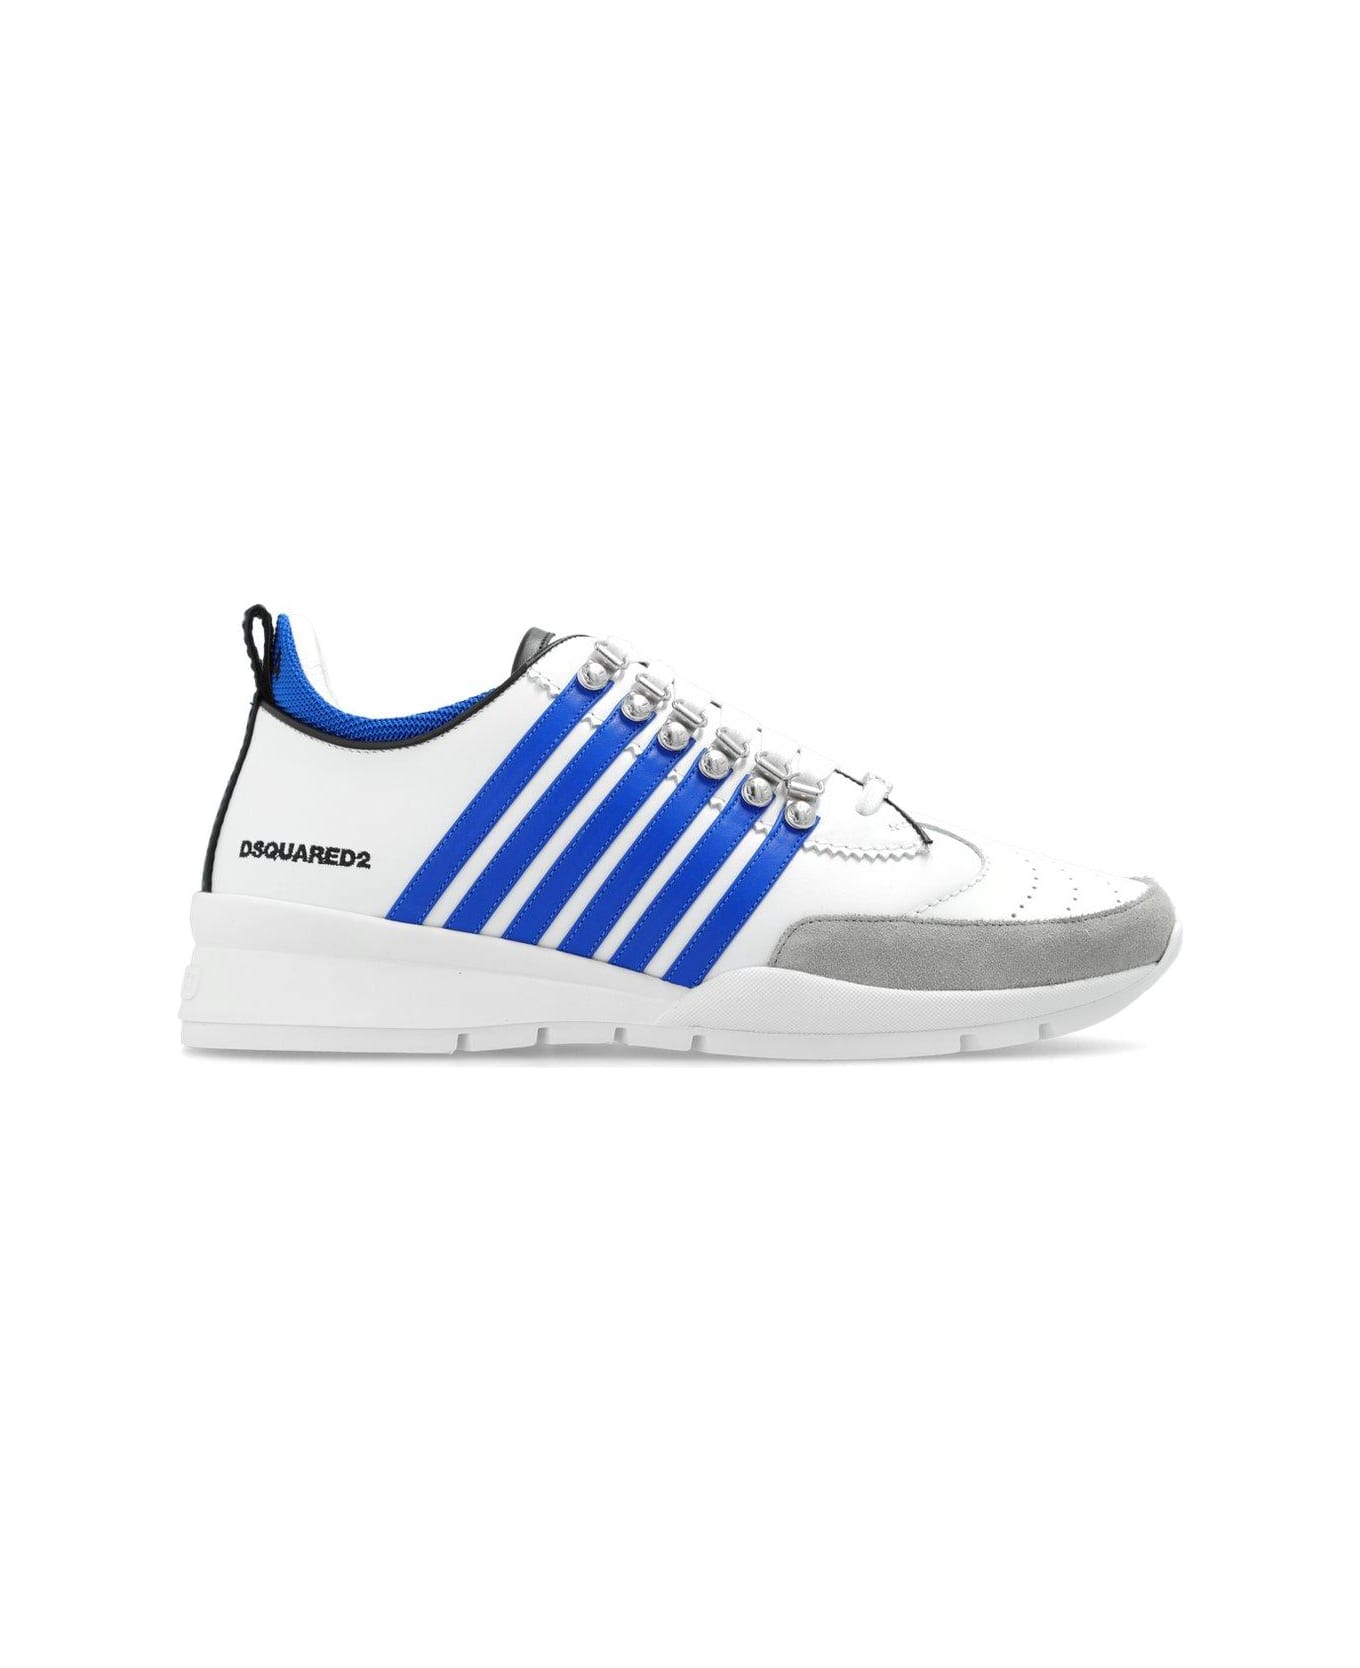 Dsquared2 Legendary Striped Almond Toe Sneakers - Bianco スニーカー